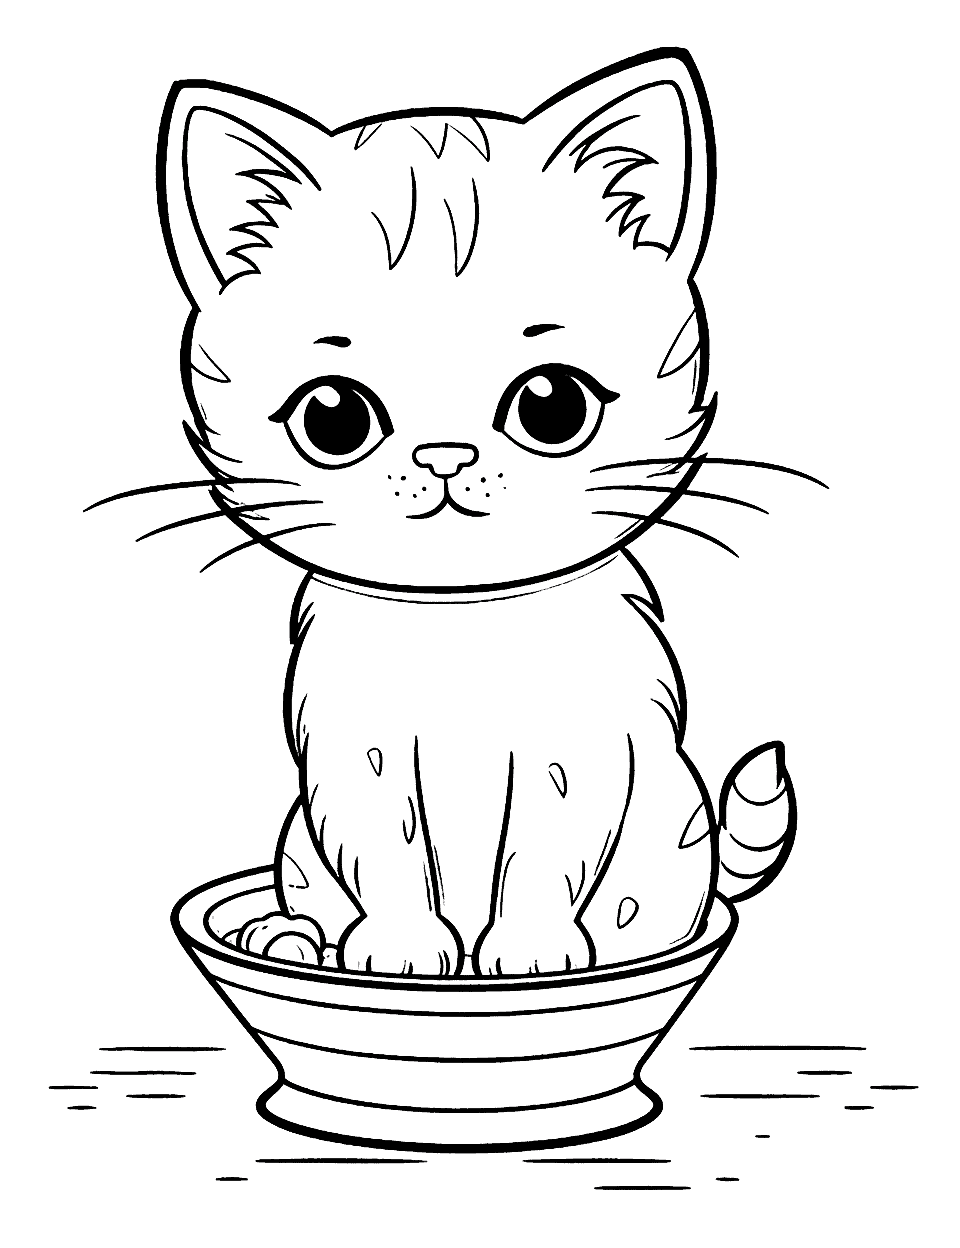 Ice Cream Cat and a Melting Sundae Coloring Page - A cat looking worriedly at an ice cream sundae that’s melting under the hot sun.